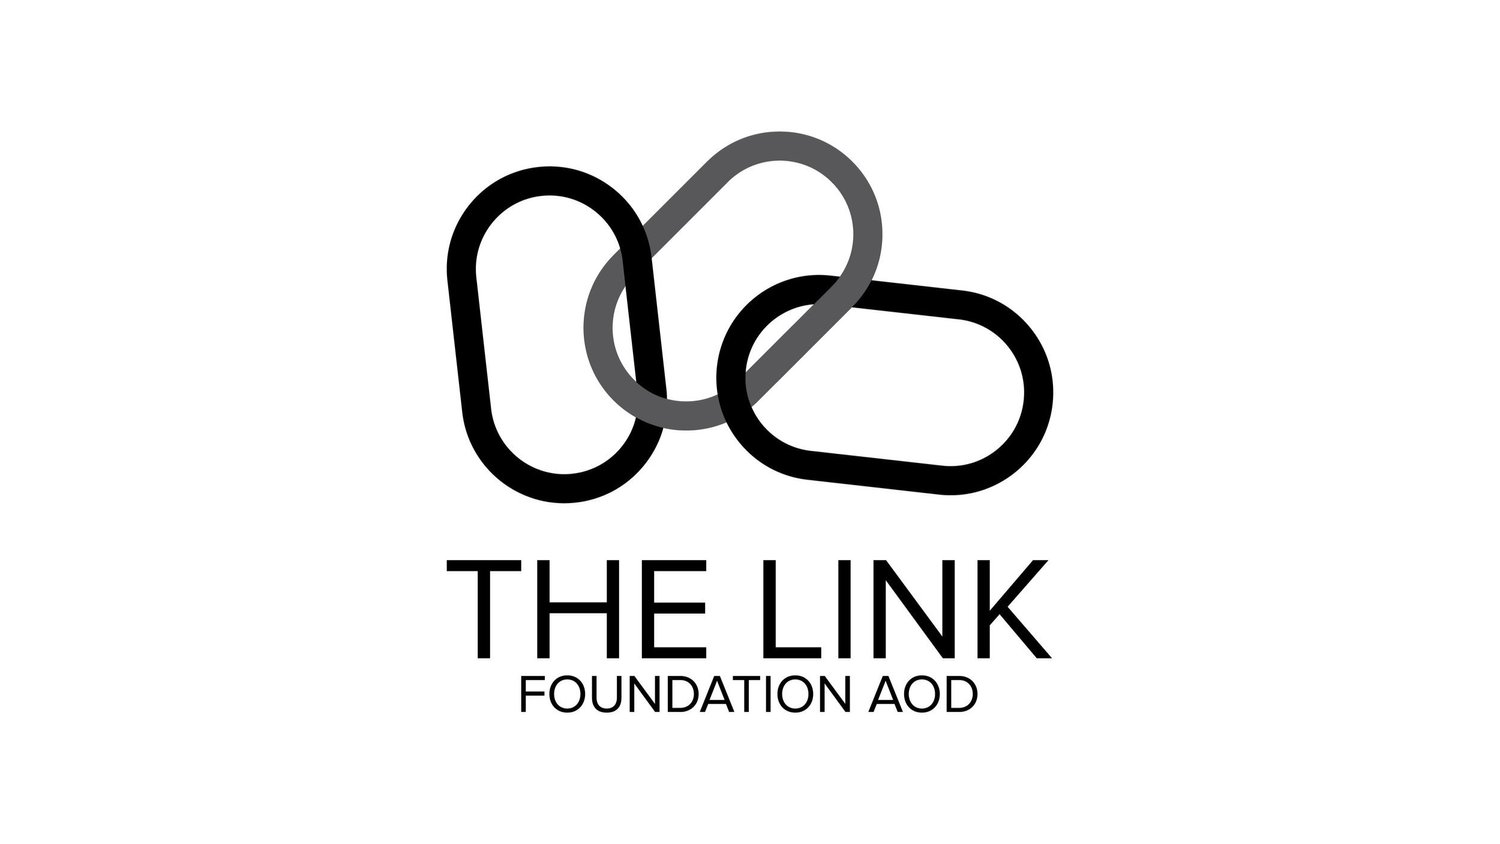 THE LINK FOUNDATION